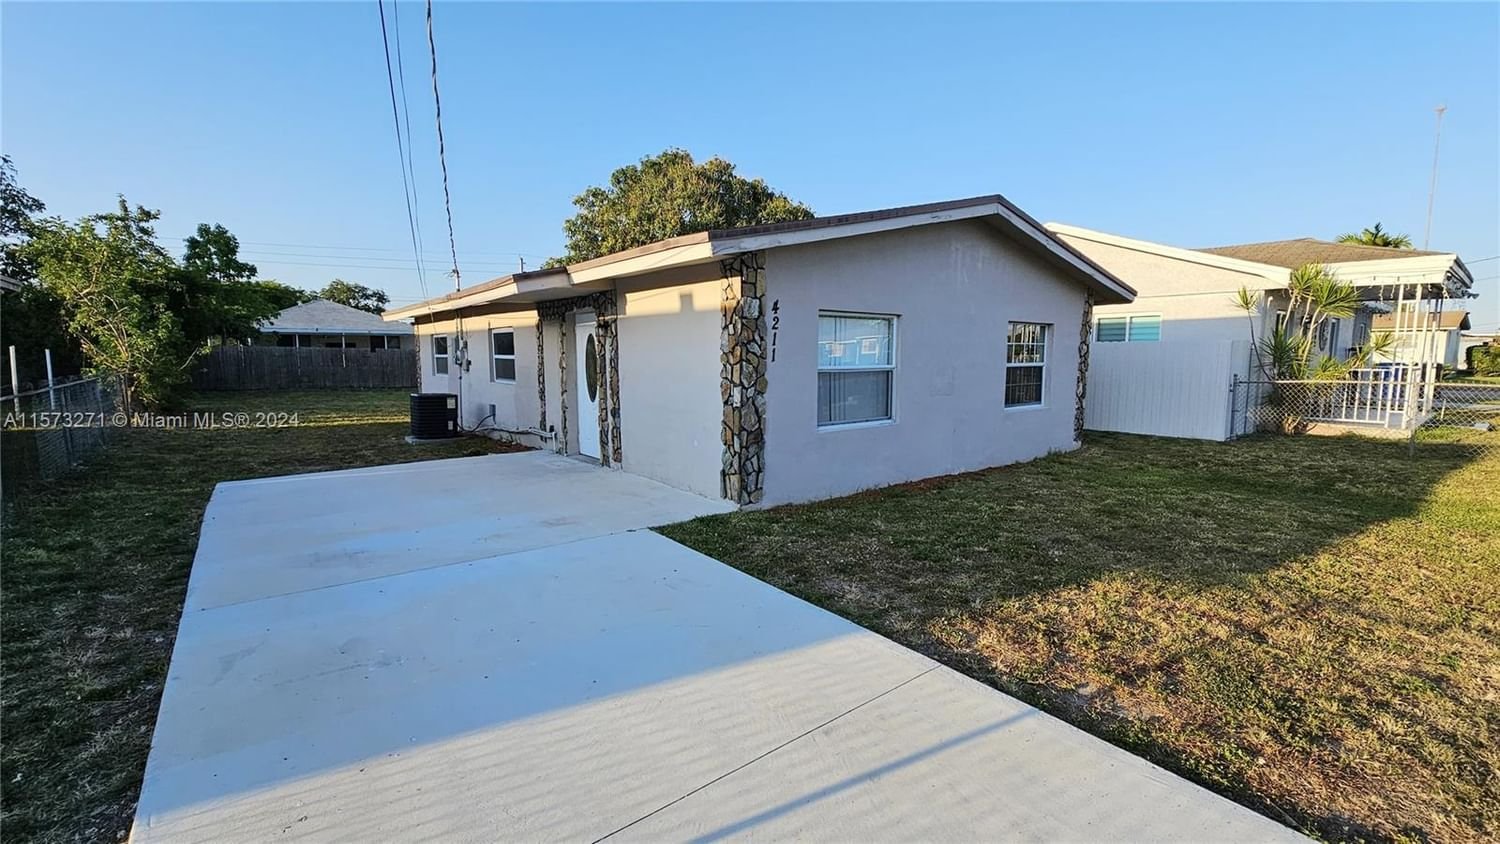 Real estate property located at 4211 21st St, Broward County, CARVER RANCHES, West Park, FL